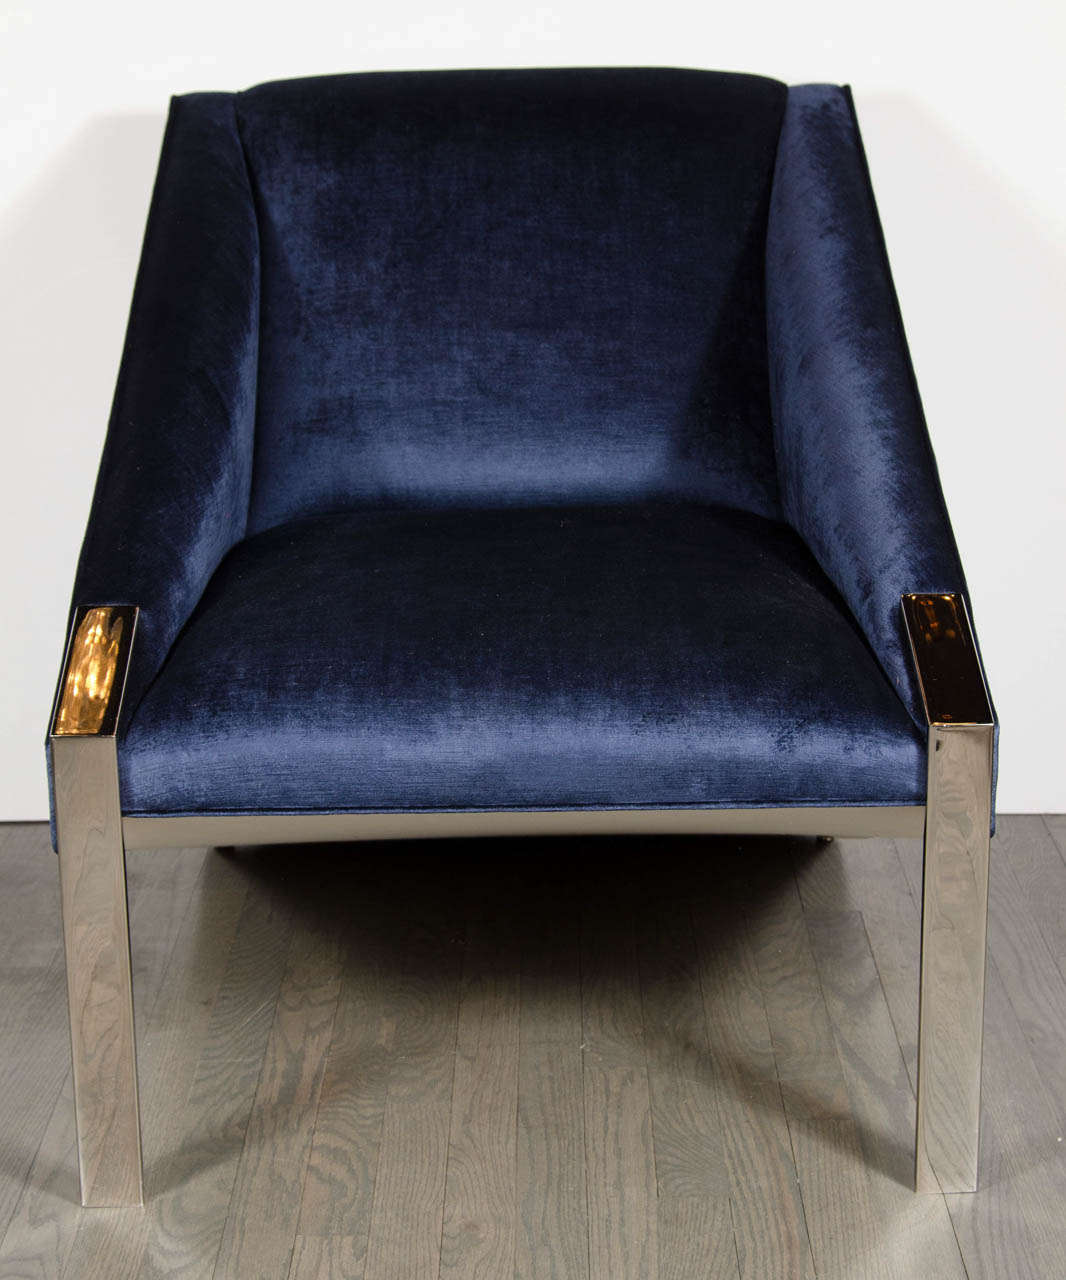 This ultra chic pair of Modernist angular club chairs attributed to Milo Baughman for Directional features slim-lined polished nickeled legs and has been newly upholstered in sapphire blue velvet.